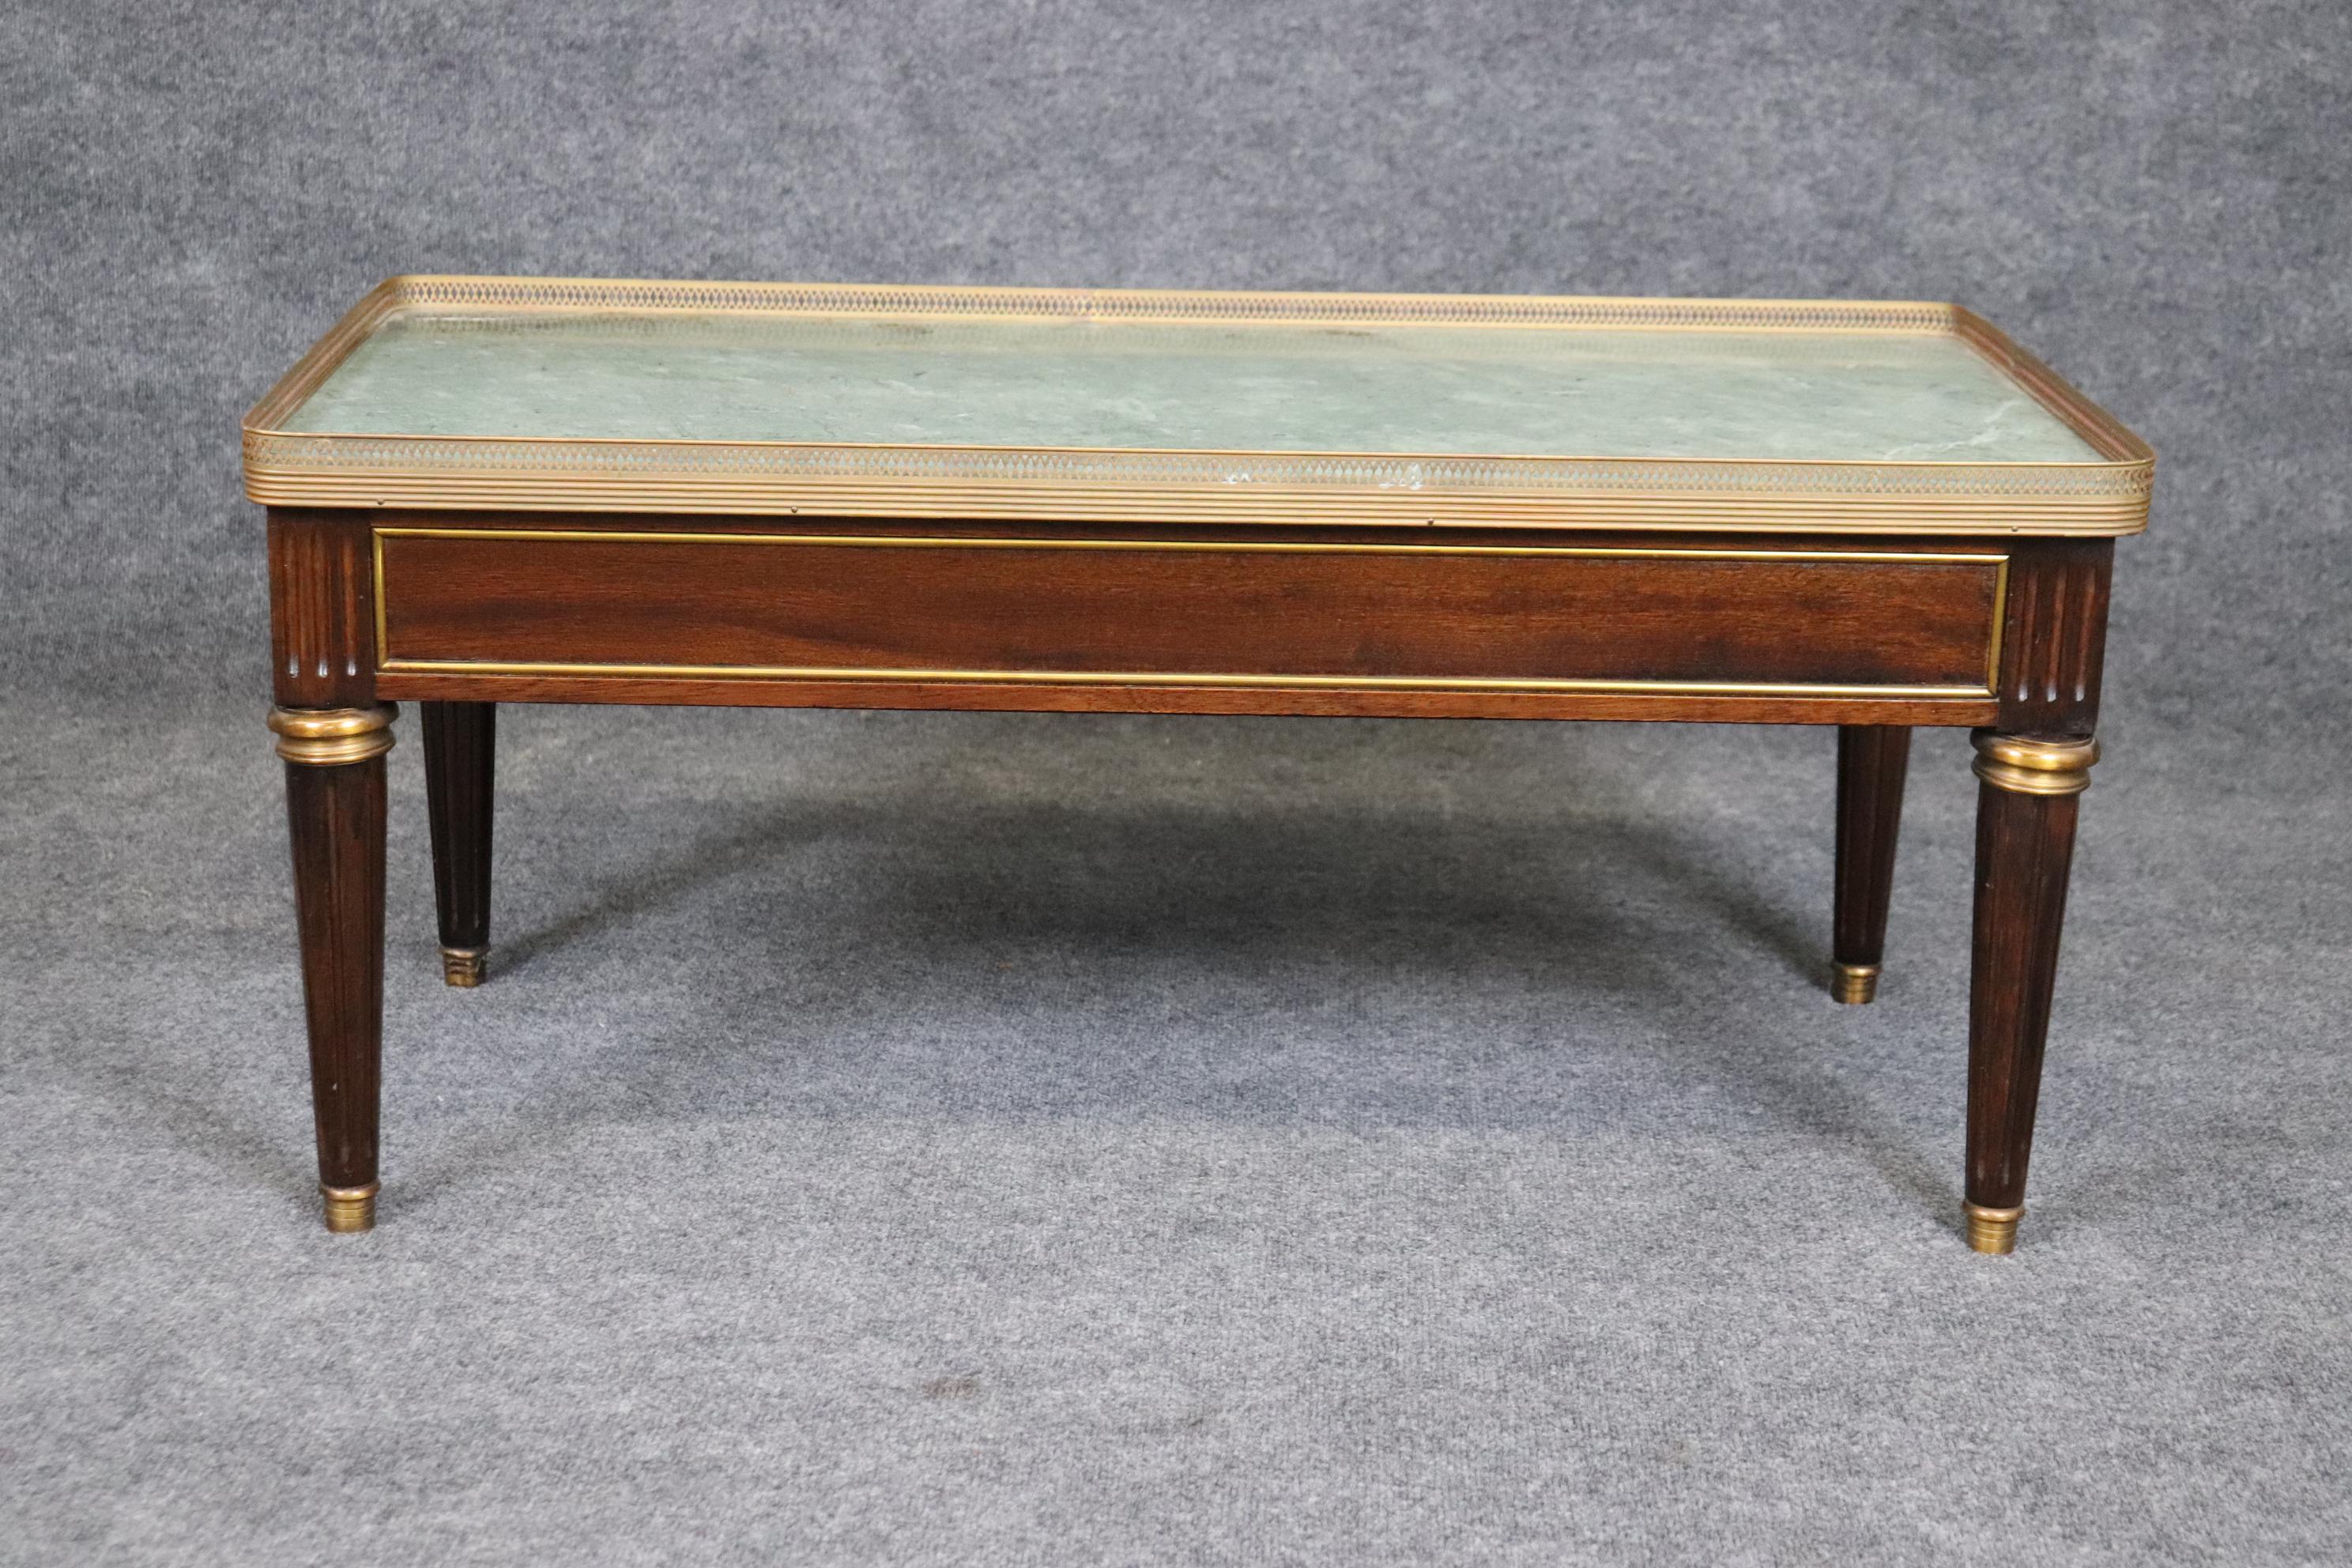 Carved Louis XVI Style Marble Top Coffee Table Attributed to Maison Jansen For Sale